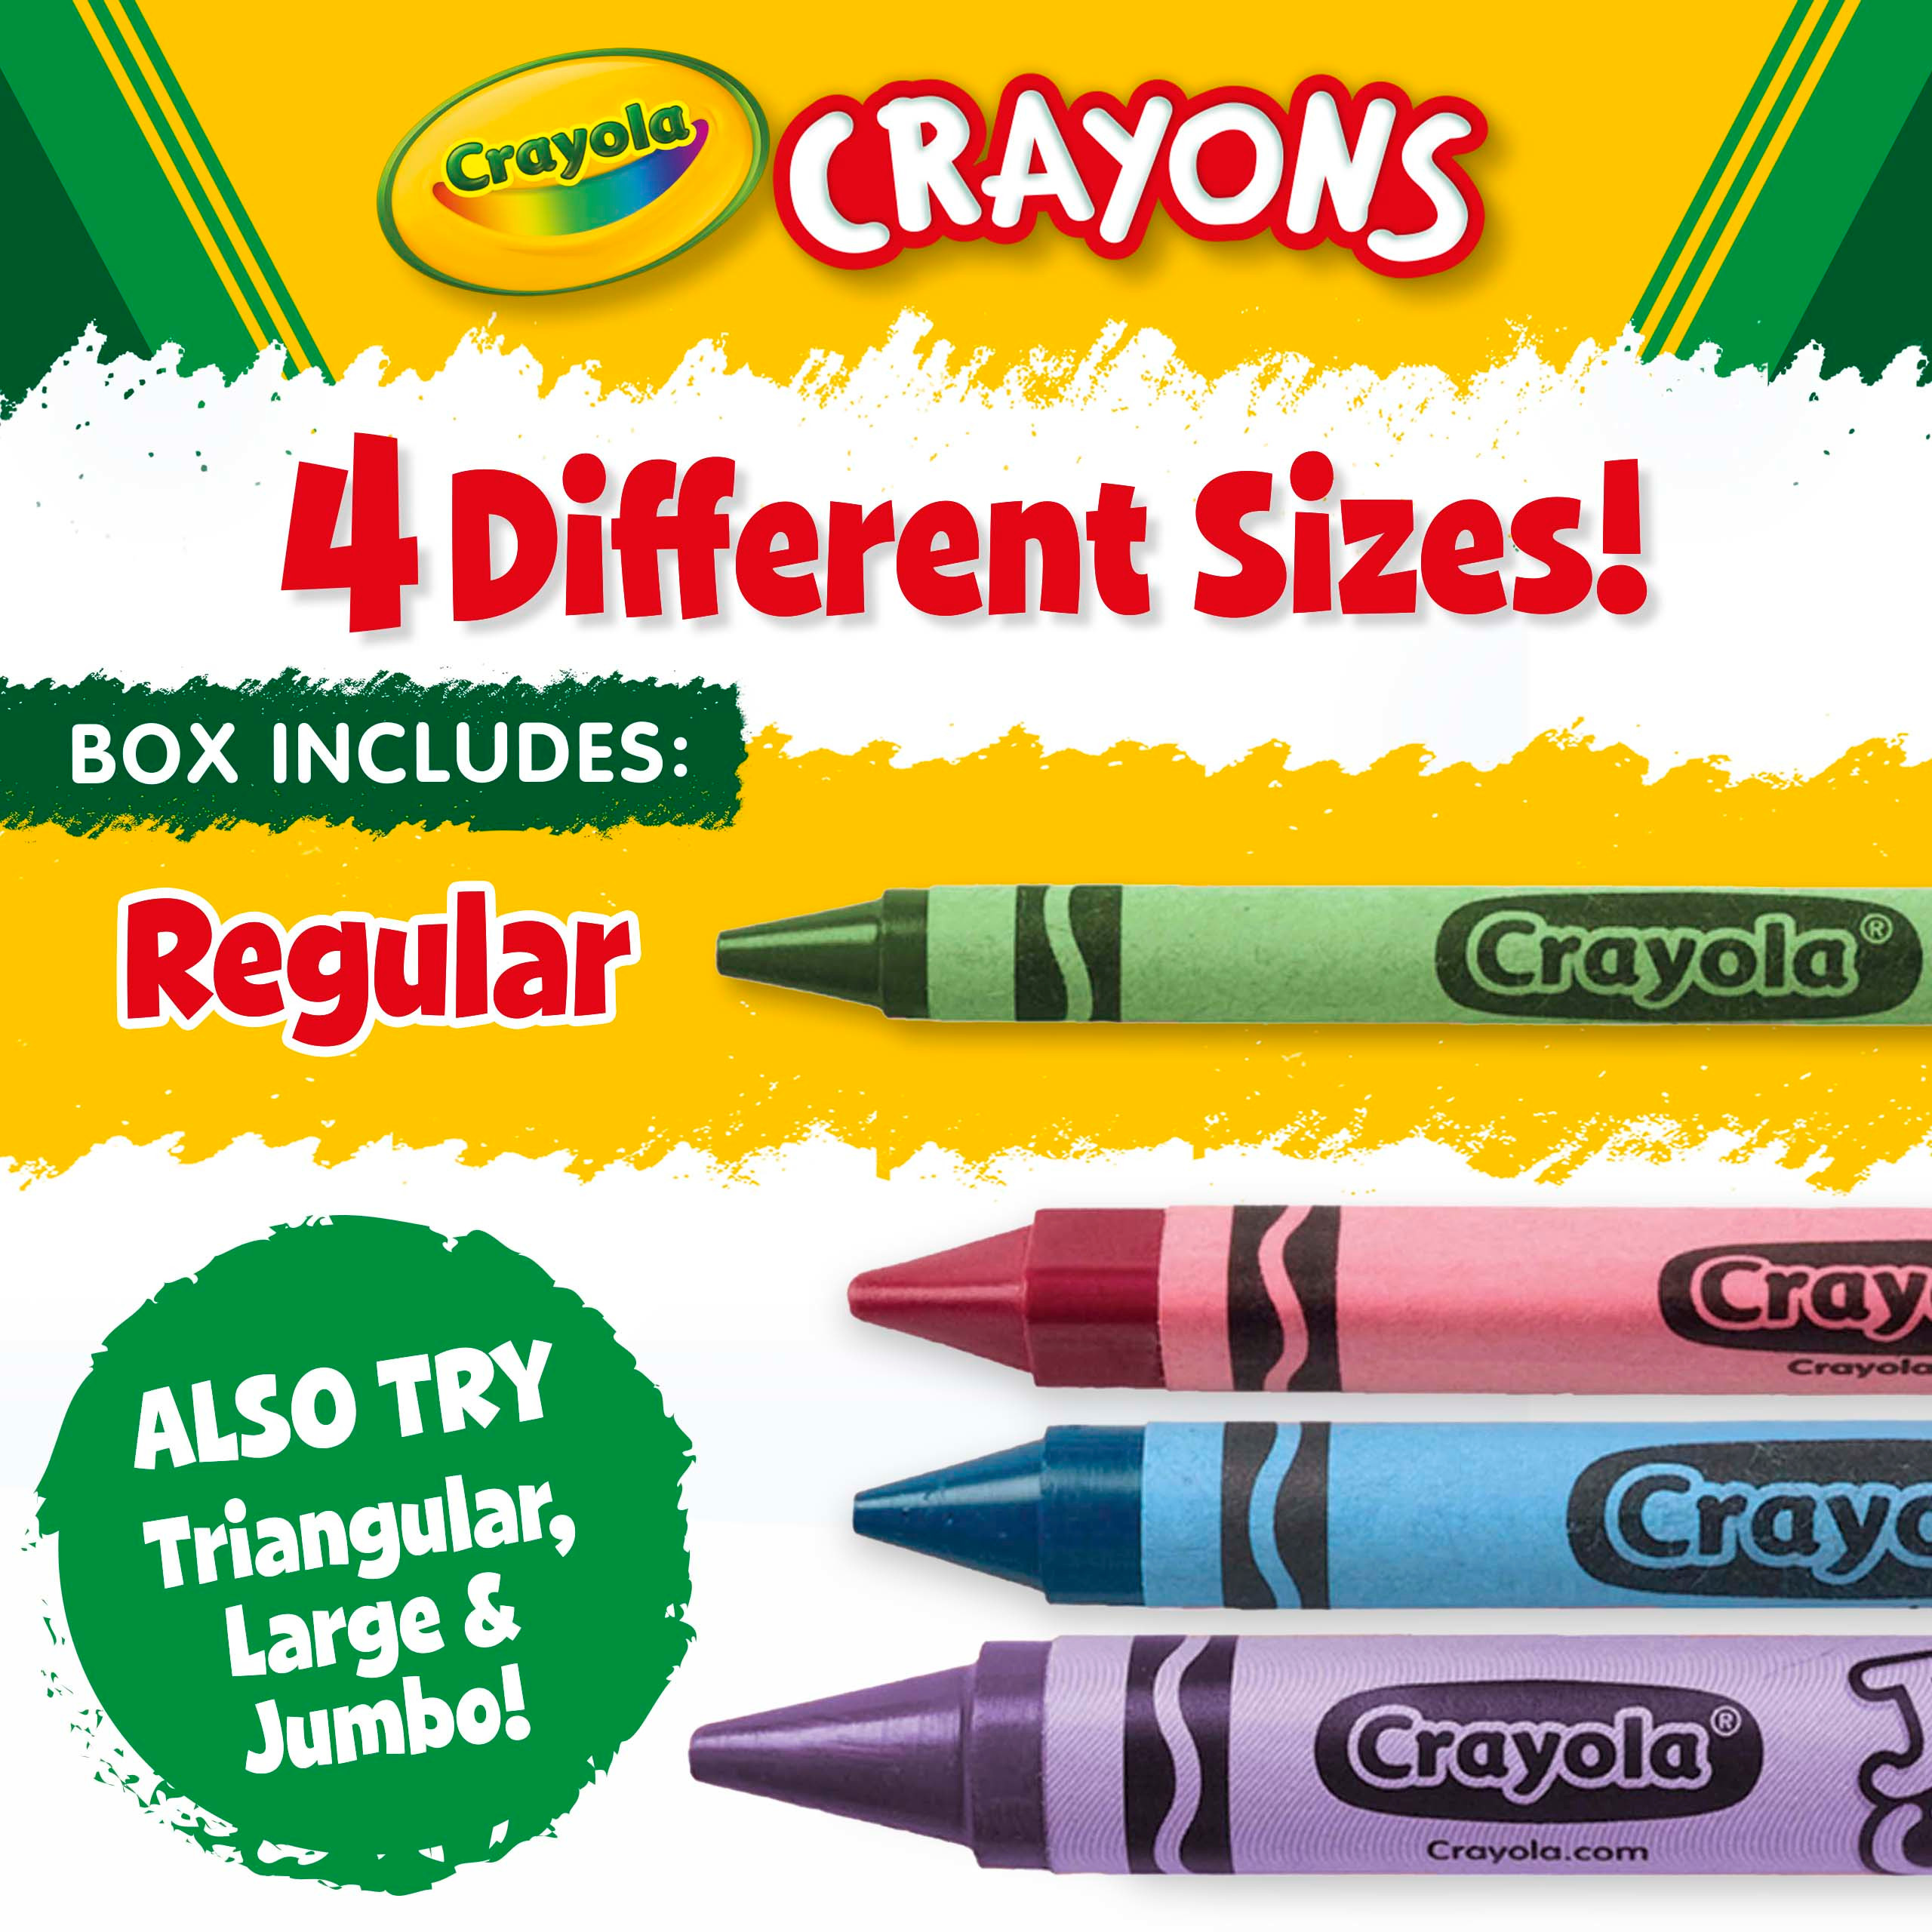 Crayola Classic Crayons, Back to School Supplies for Kids, 8 Ct, Art Supplies - image 6 of 10